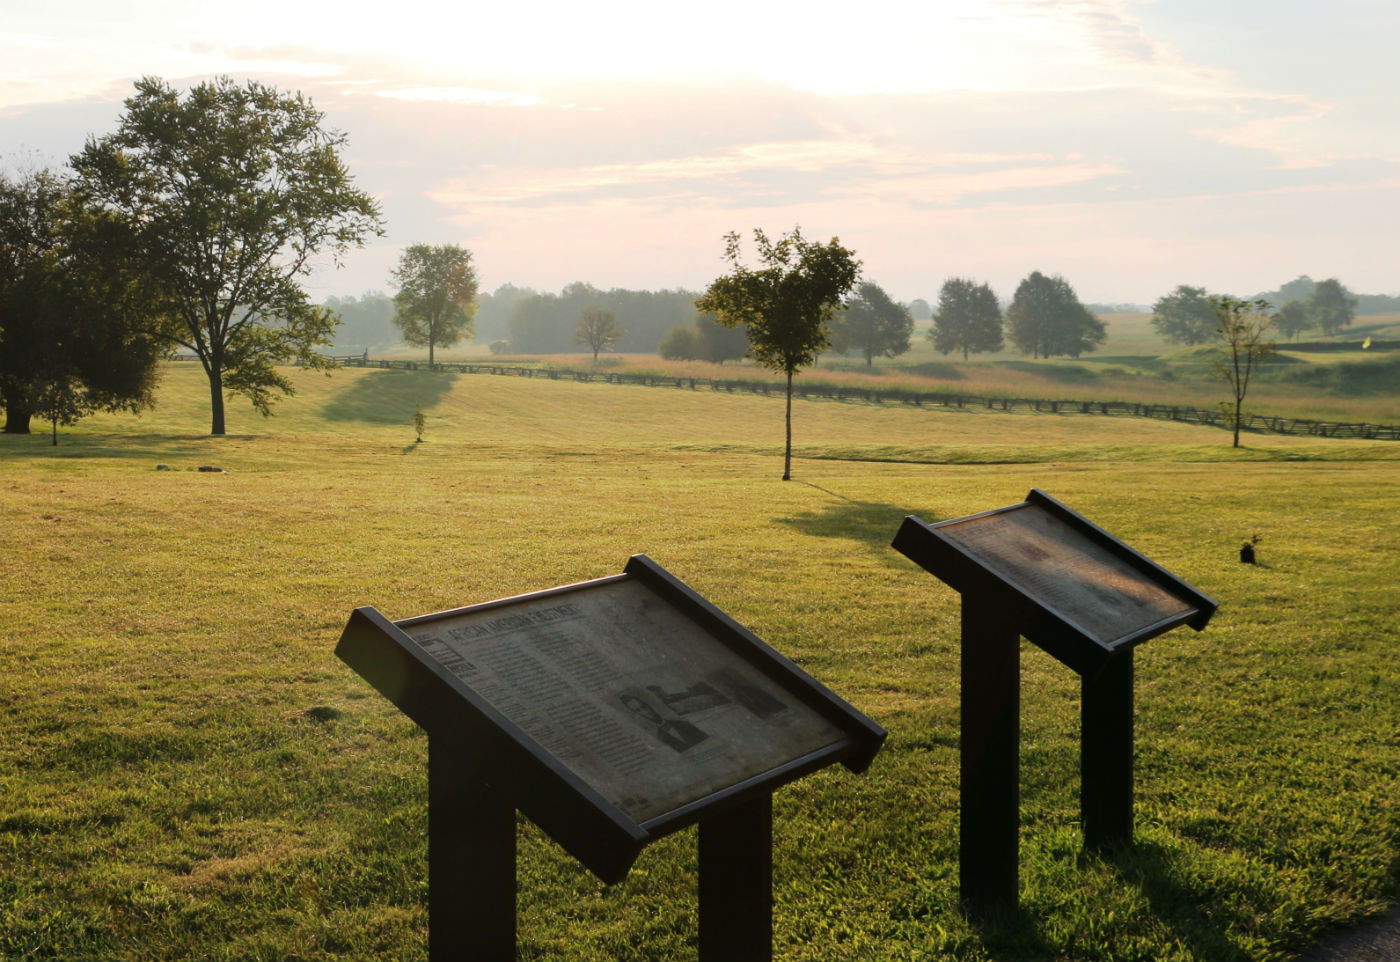 Two informational plaques stand on a grassy field near a wooden fence.